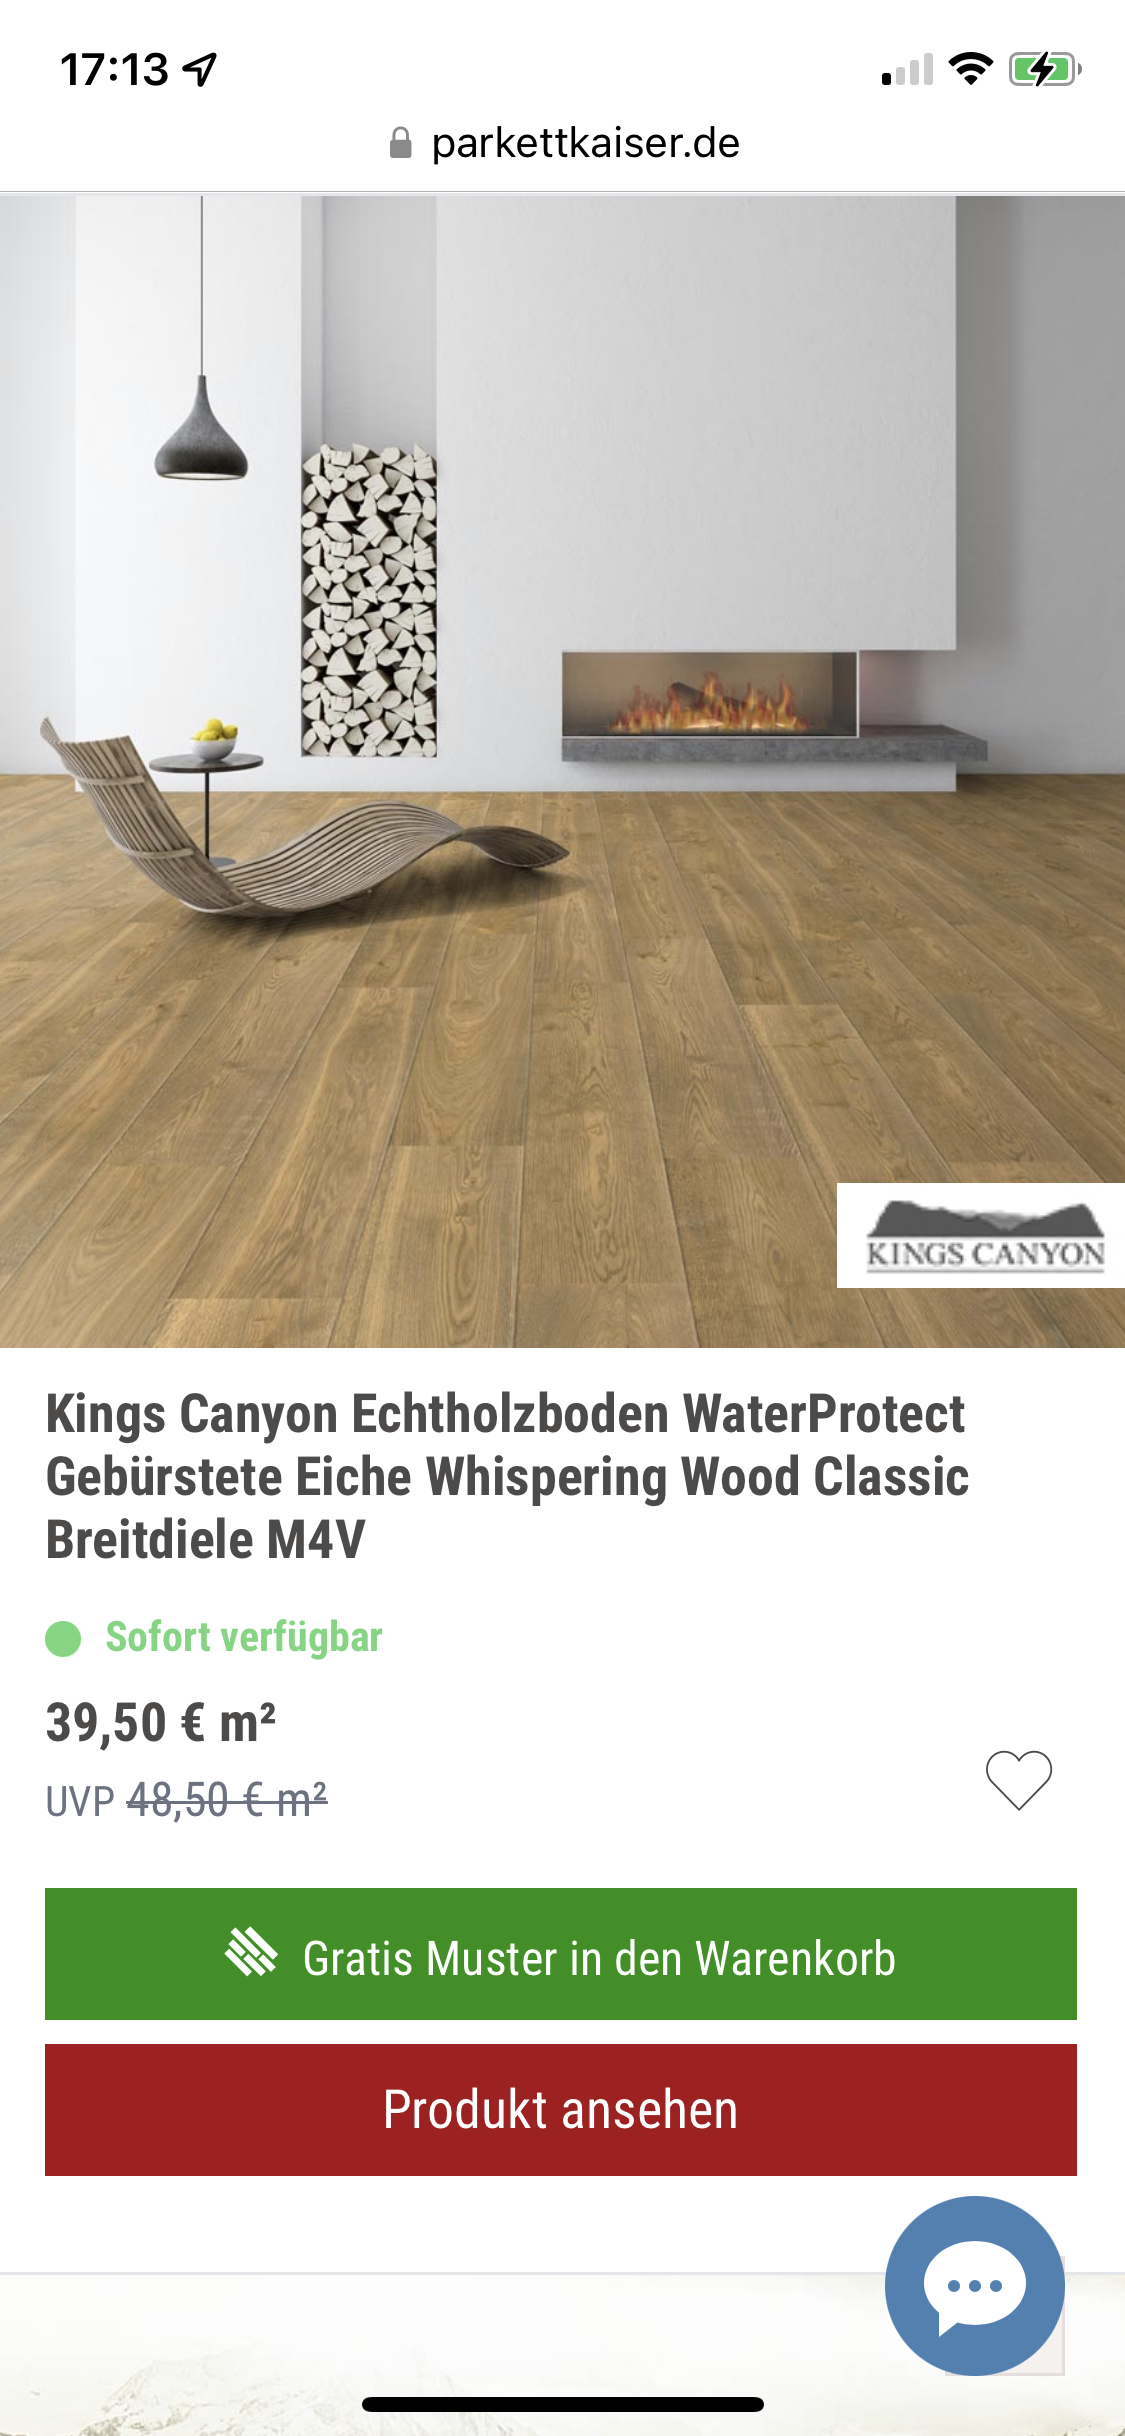 Parquet emperor sample order: category page with call-to-action